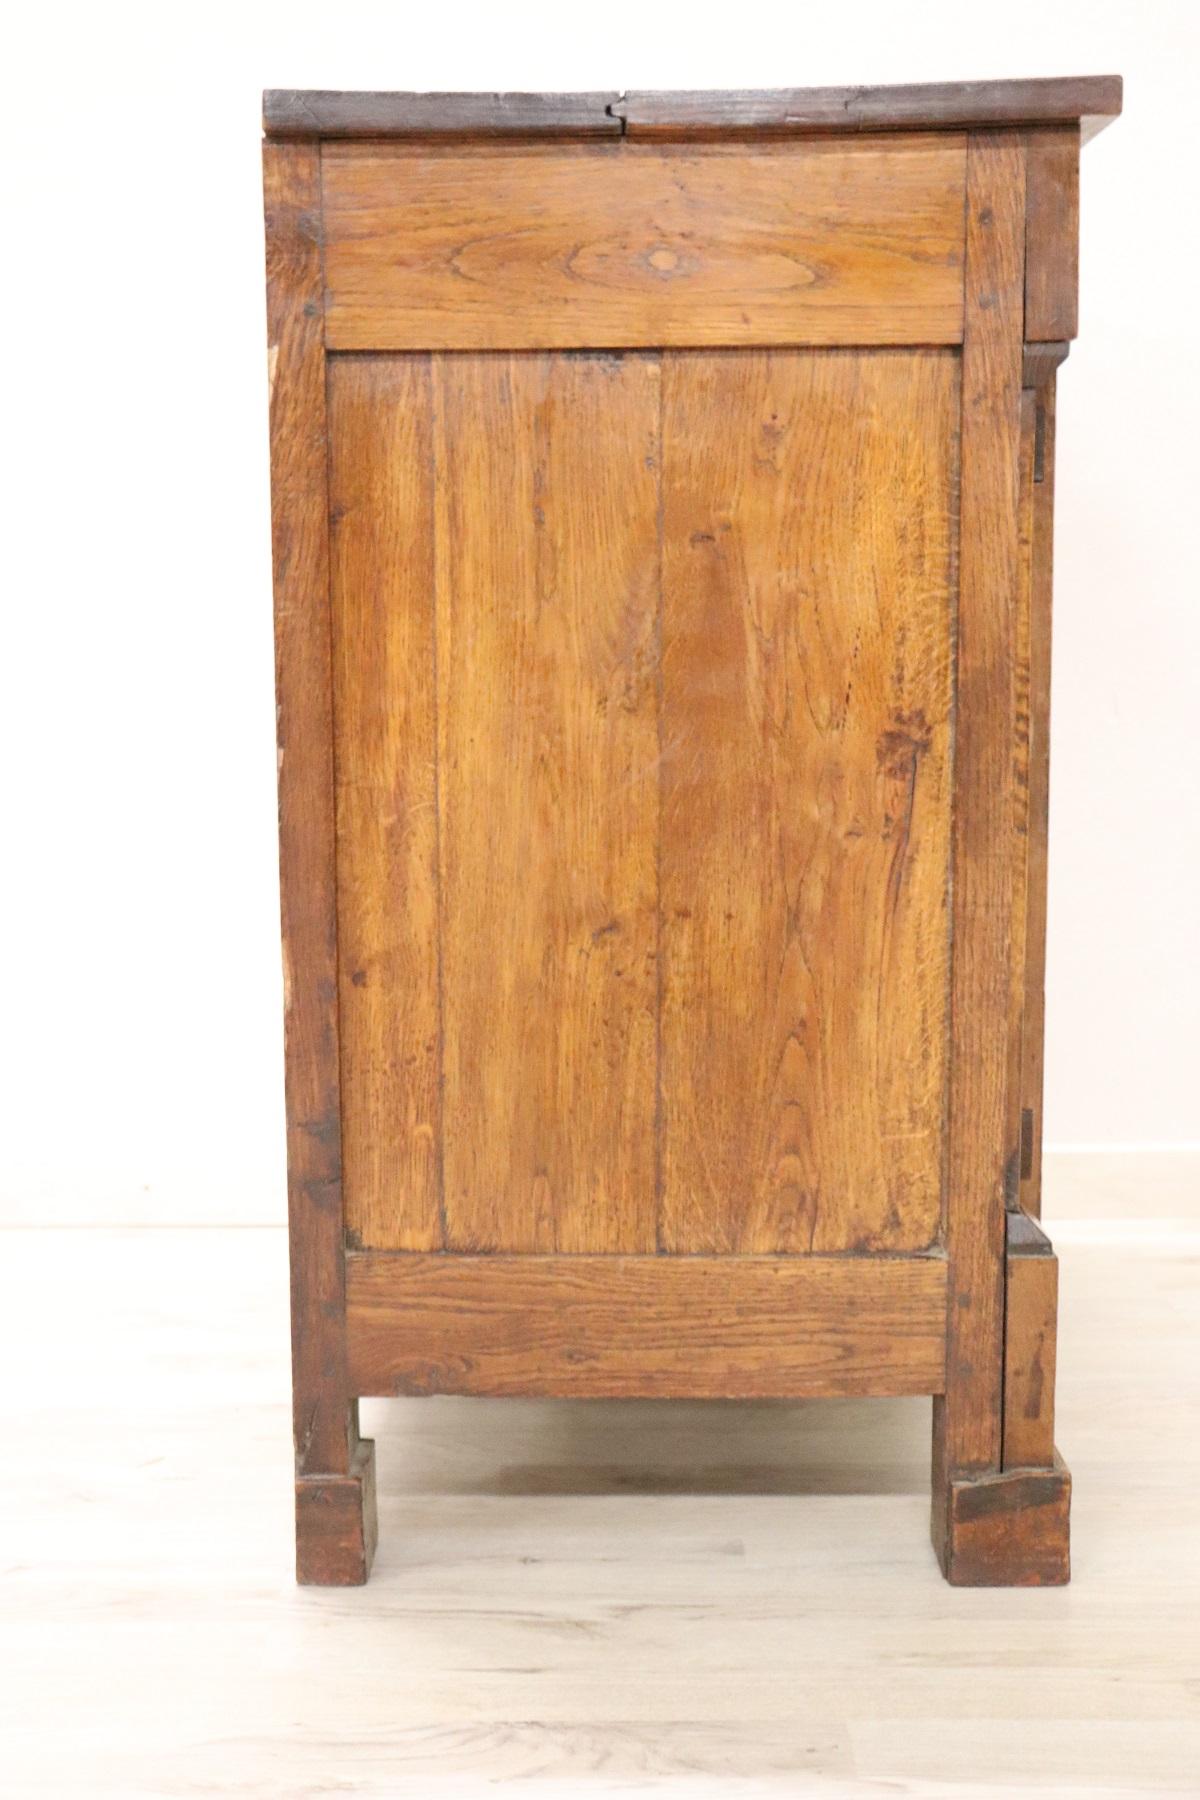 19th Century Italian Chestnut Wood Small Rustic Sideboard, Buffet or Credenza 2